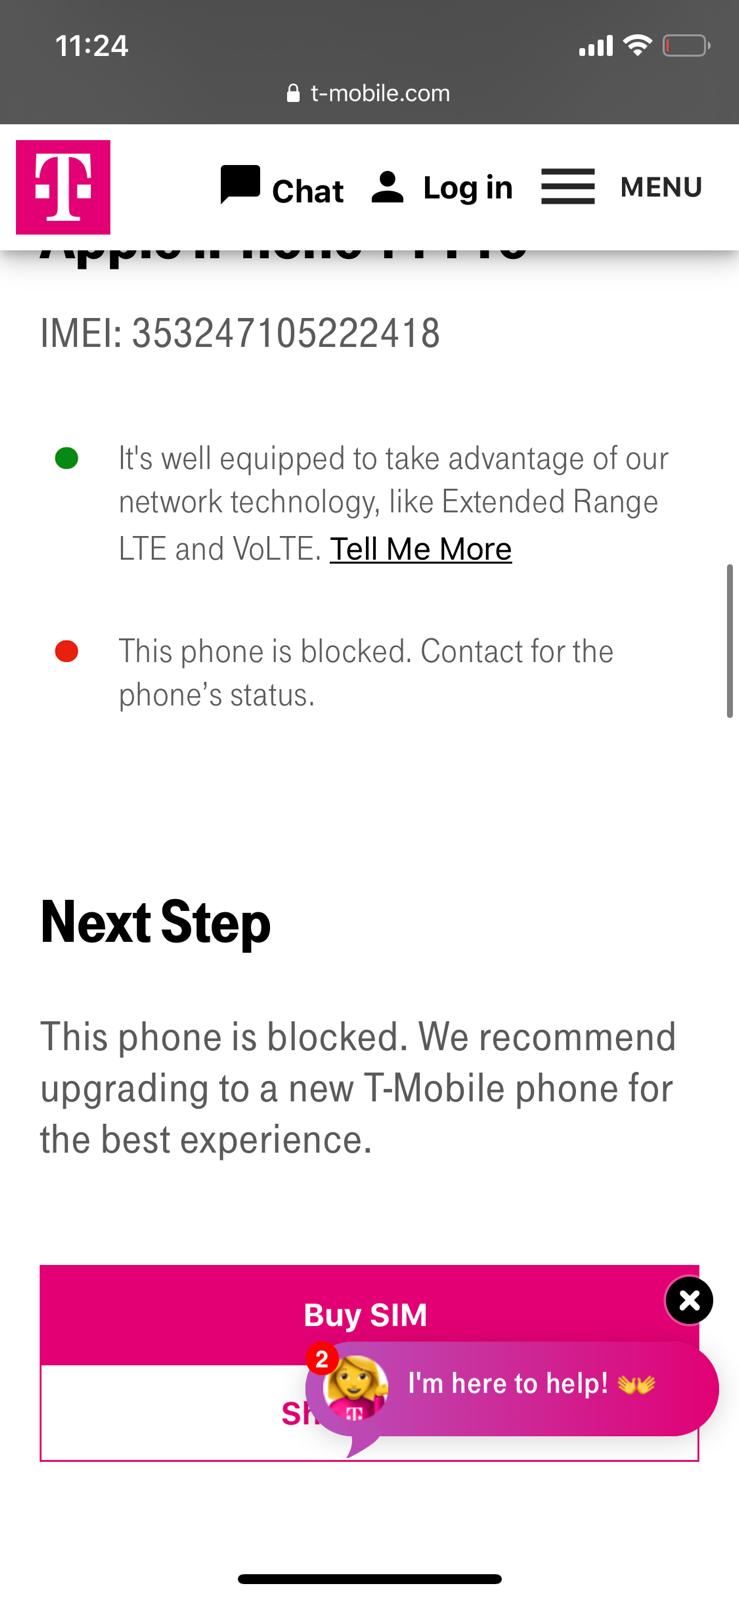 Device blocked for lost/stolen per T-Mobile